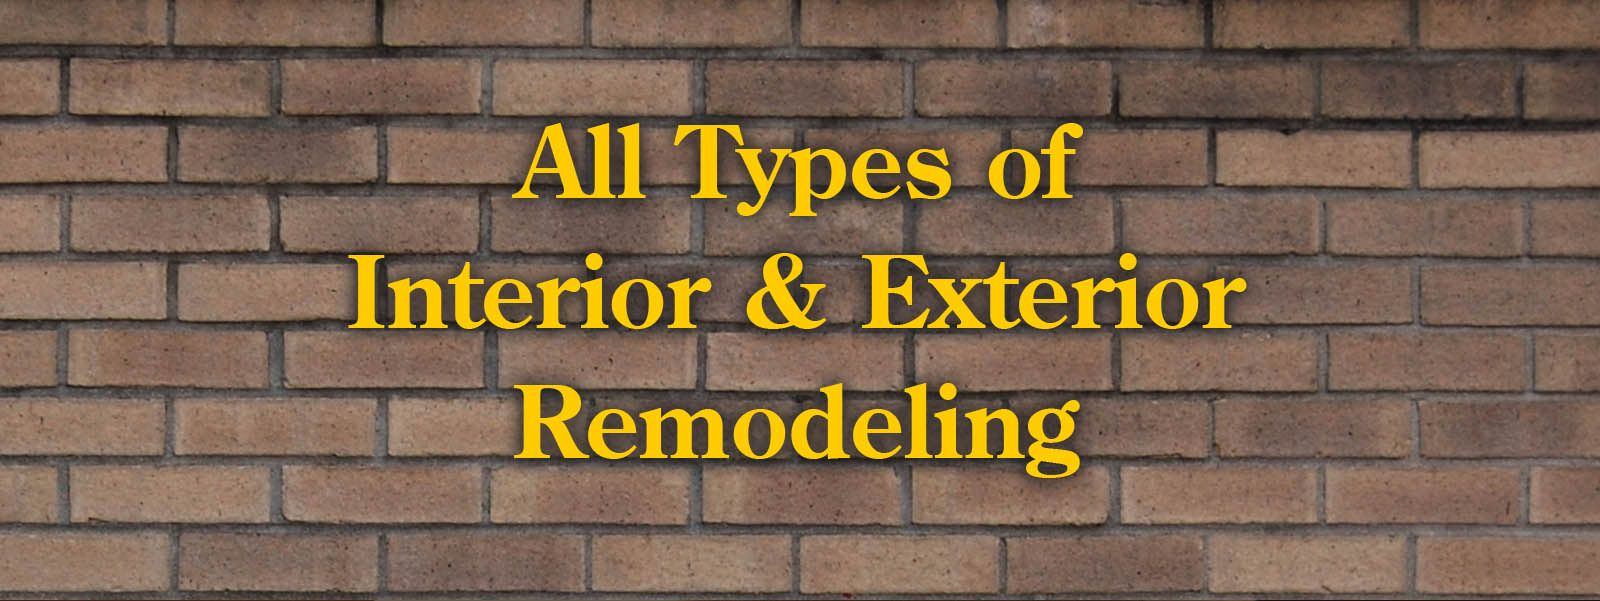 All types of remodeling and home renovation throughout Atlanta, Decatur, Gwinnett County, Dekalb County and surrounding areas.